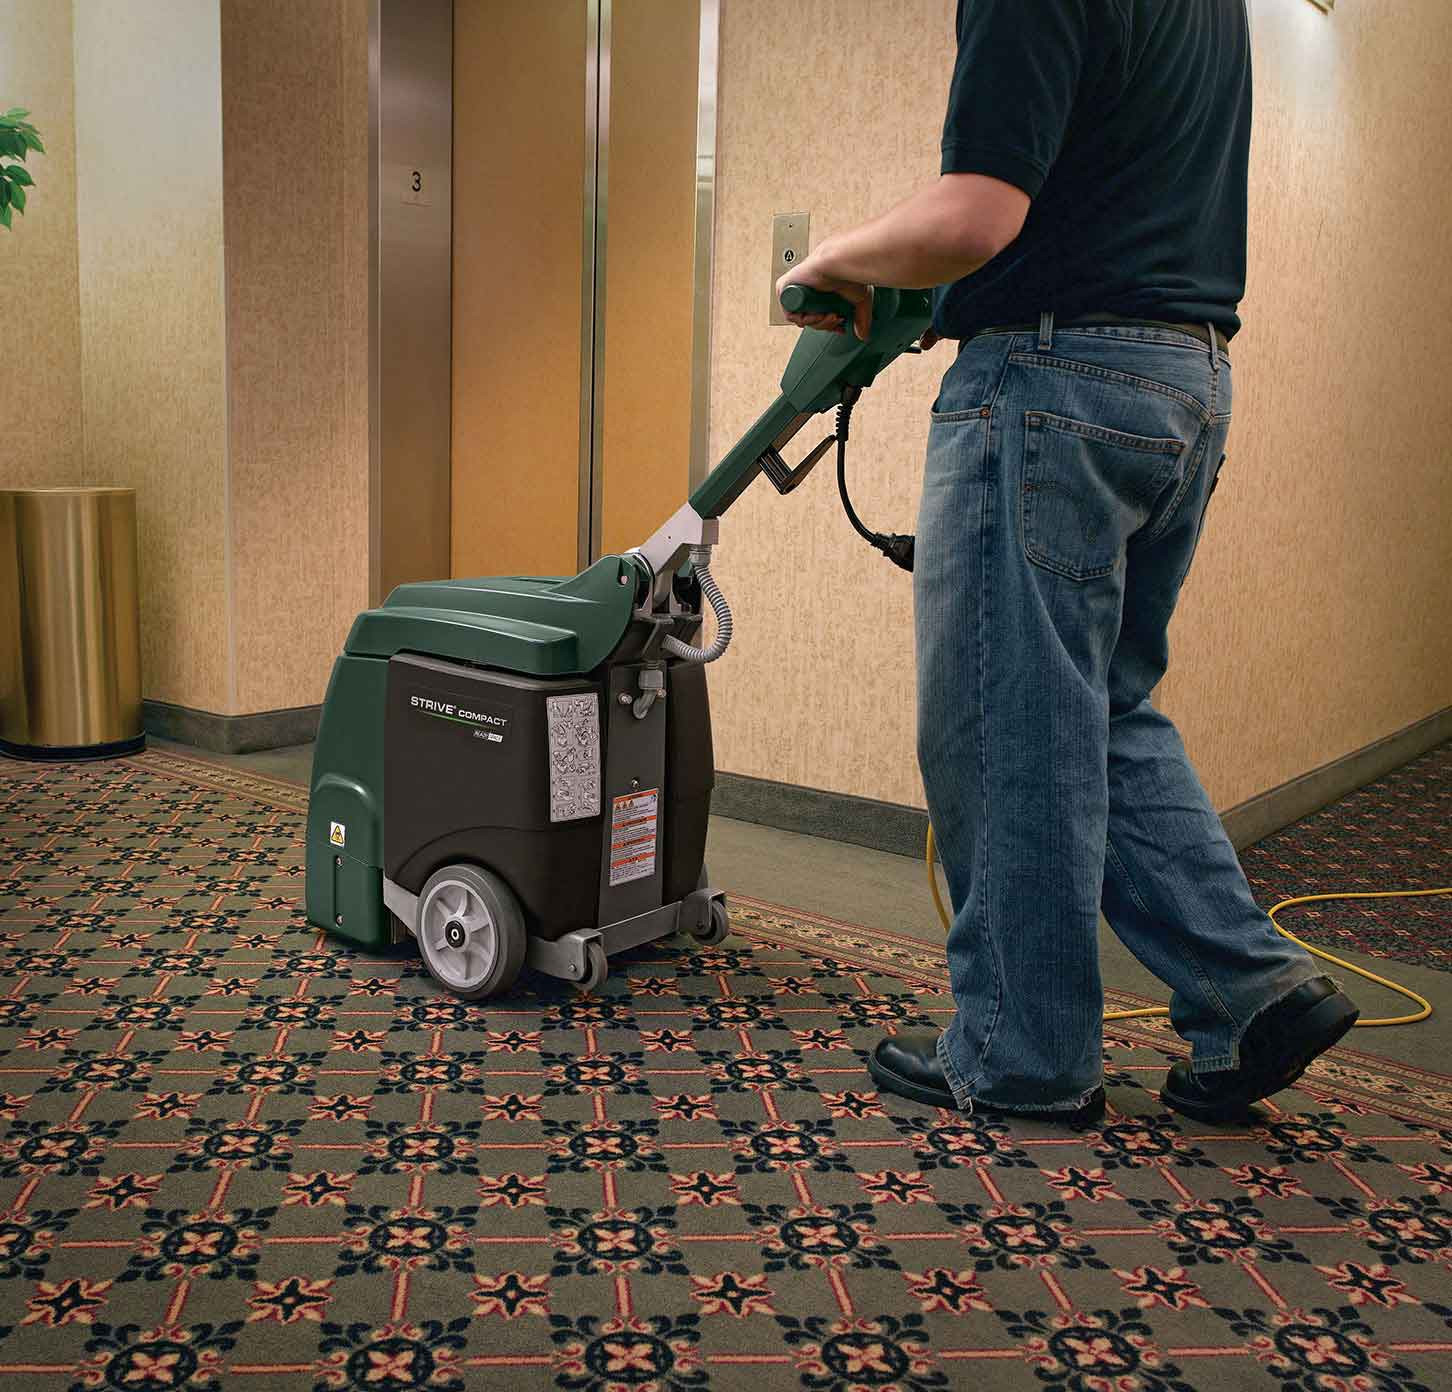 26 attractive Hardwood and Tile Floor Cleaning Machines 2024 free download hardwood and tile floor cleaning machines of strive compact rapid drying carpet extractor nobles pertaining to strive compact compact rapid drying carpet extractor alt 2